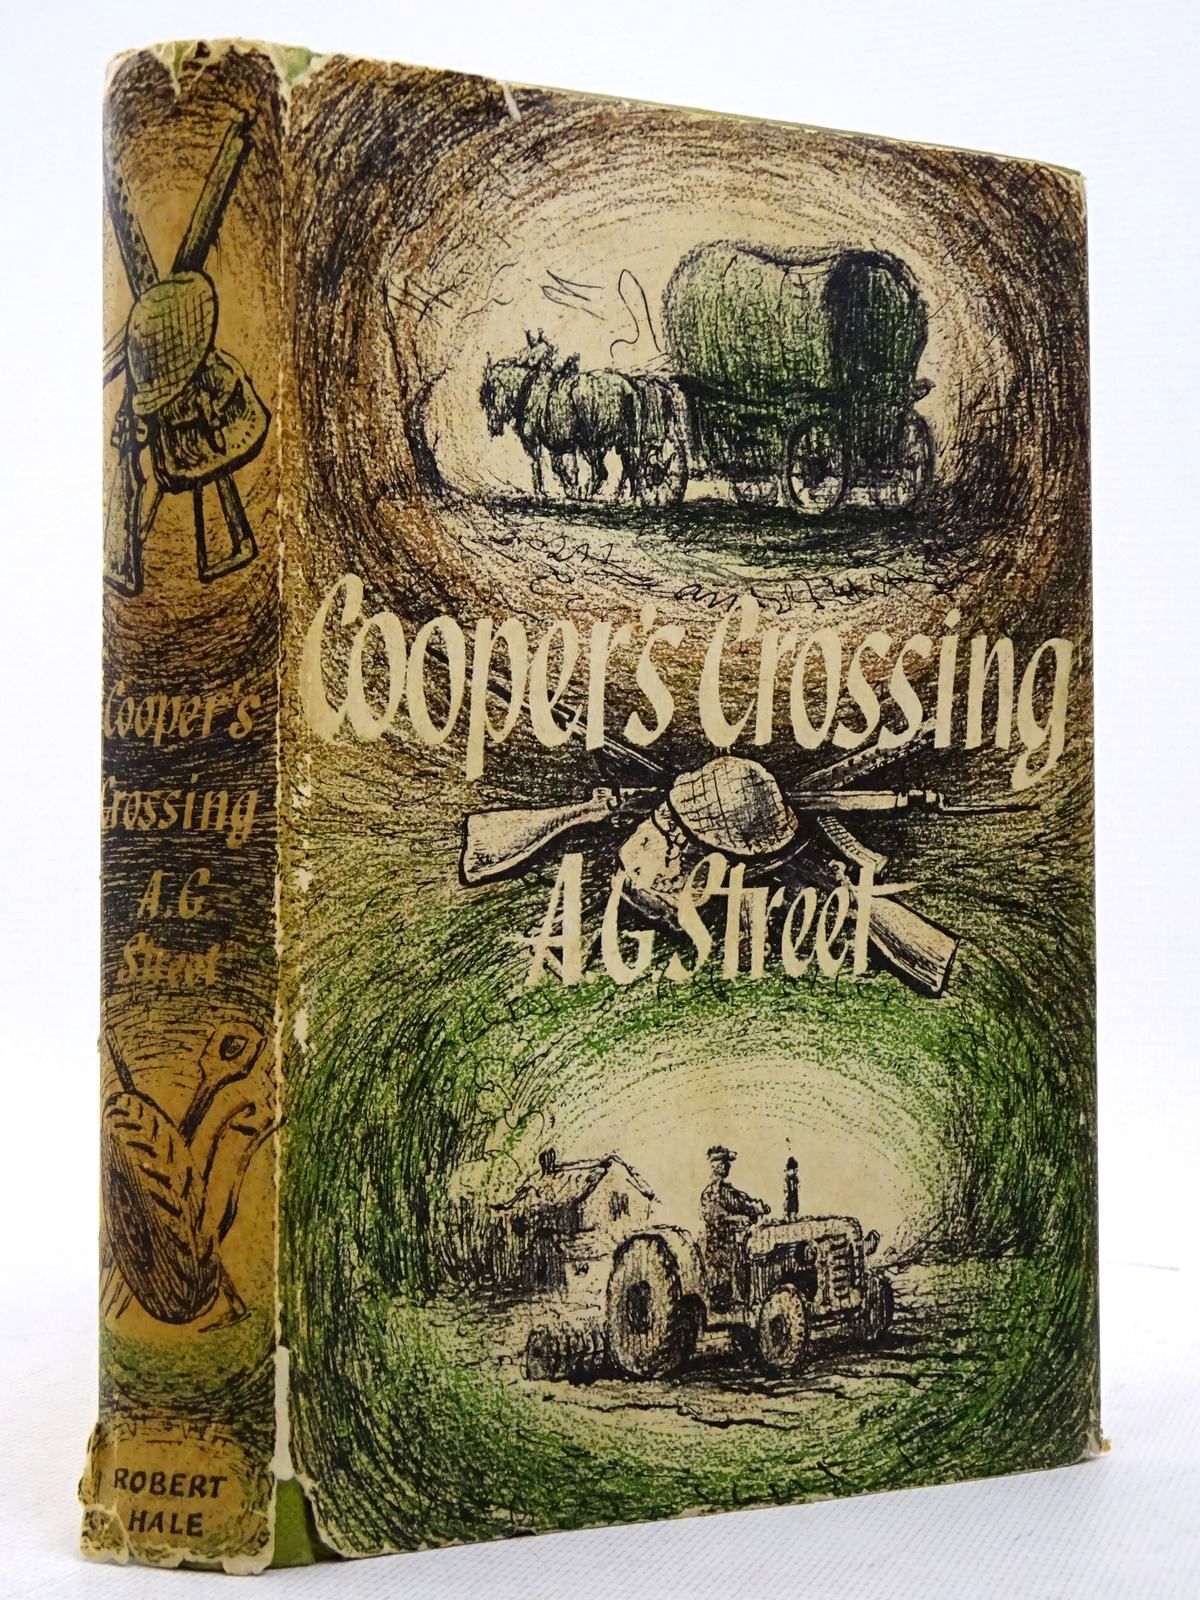 Photo of COOPER'S CROSSING written by Street, A.G. published by Robert Hale Limited (STOCK CODE: 1817317)  for sale by Stella & Rose's Books